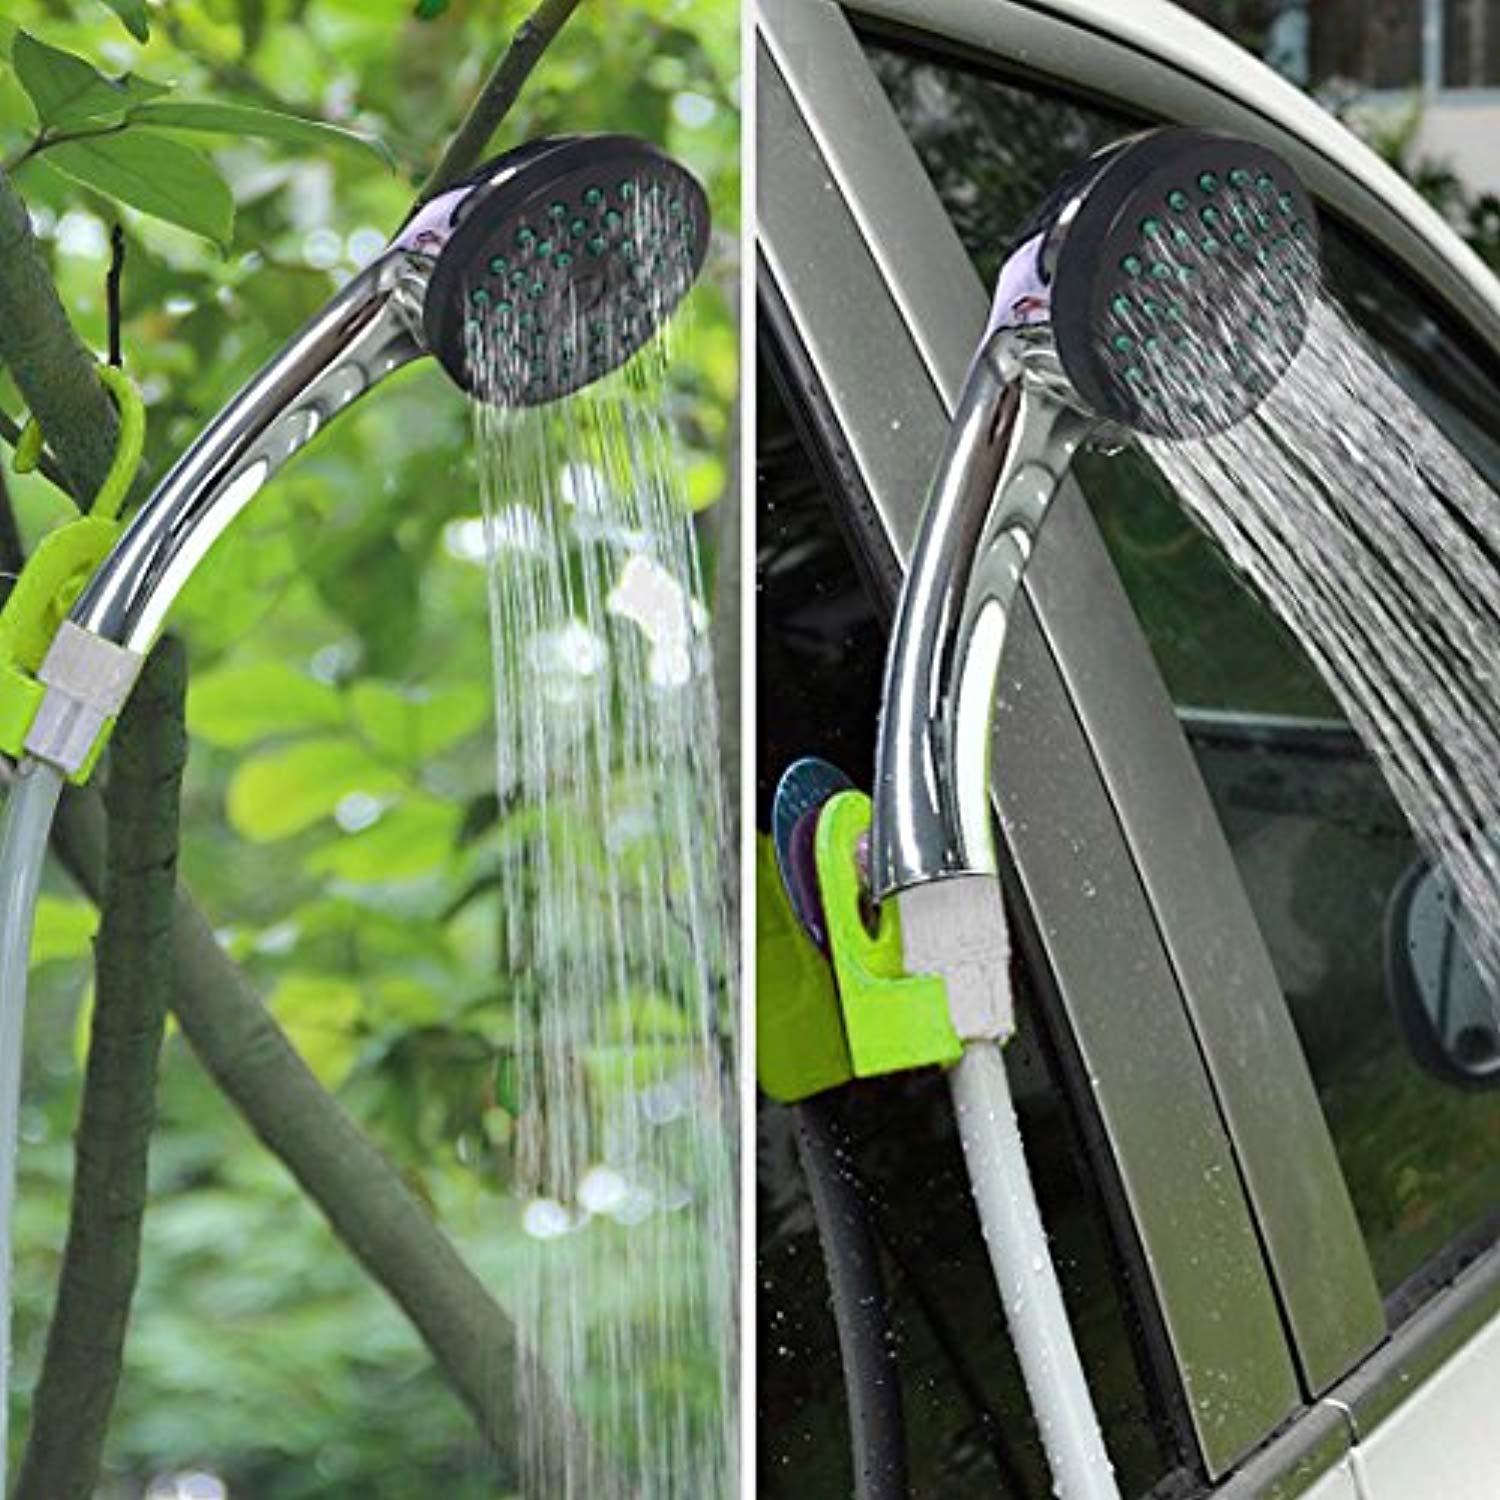 Portable Outdoor Shower, Pumps Water from Bucket Into Steady Shower Stream,Compact Handheld Rechargeable Camping Showerhead,Pumps Water from Bucket Into Steady, Gentle Shower Stream,USB Charging Plug